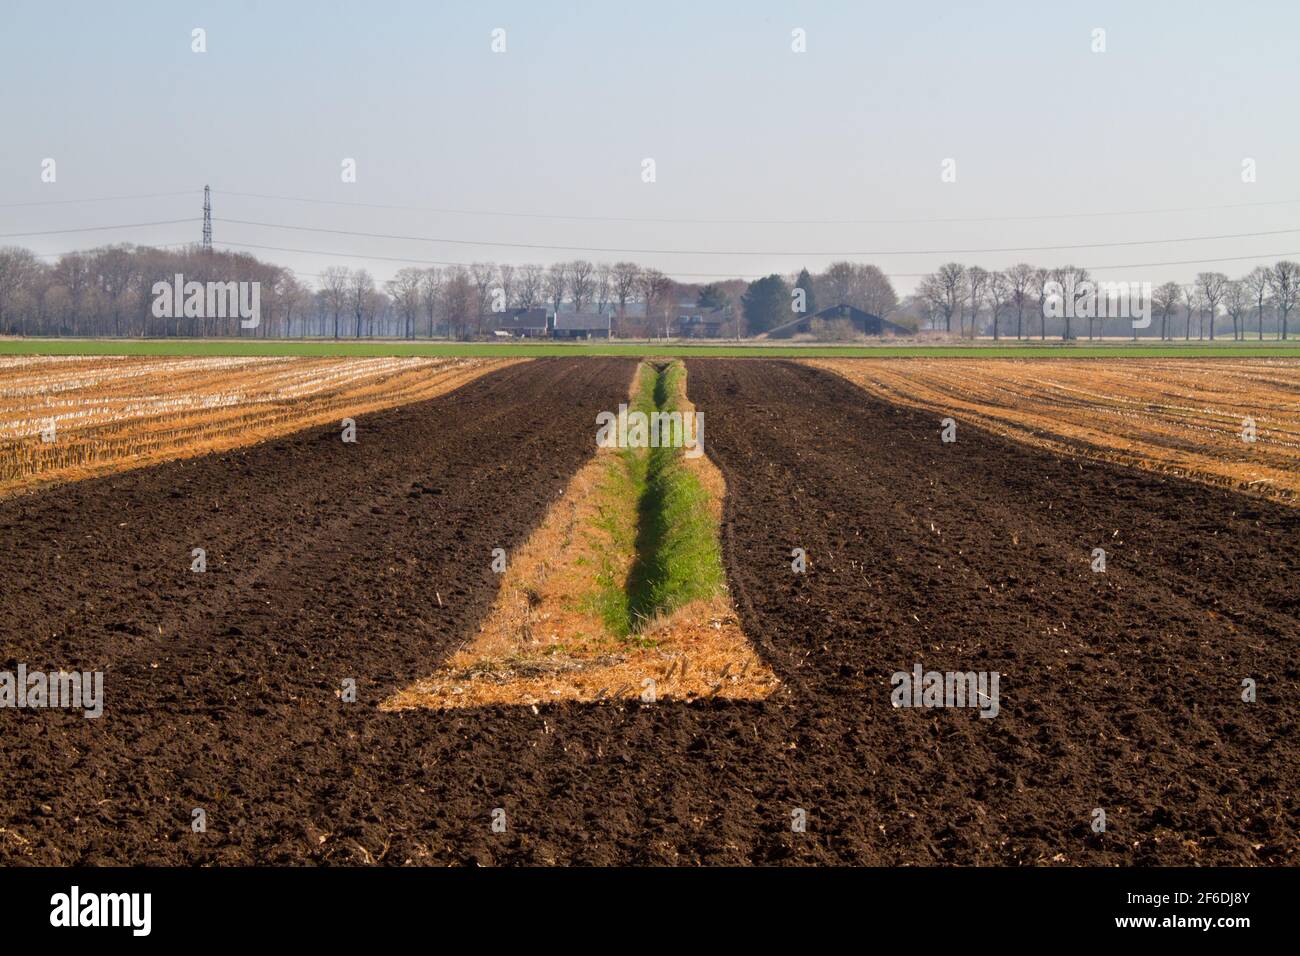 Rational agriculture in spring: straight lines in a dull landscape Stock Photo